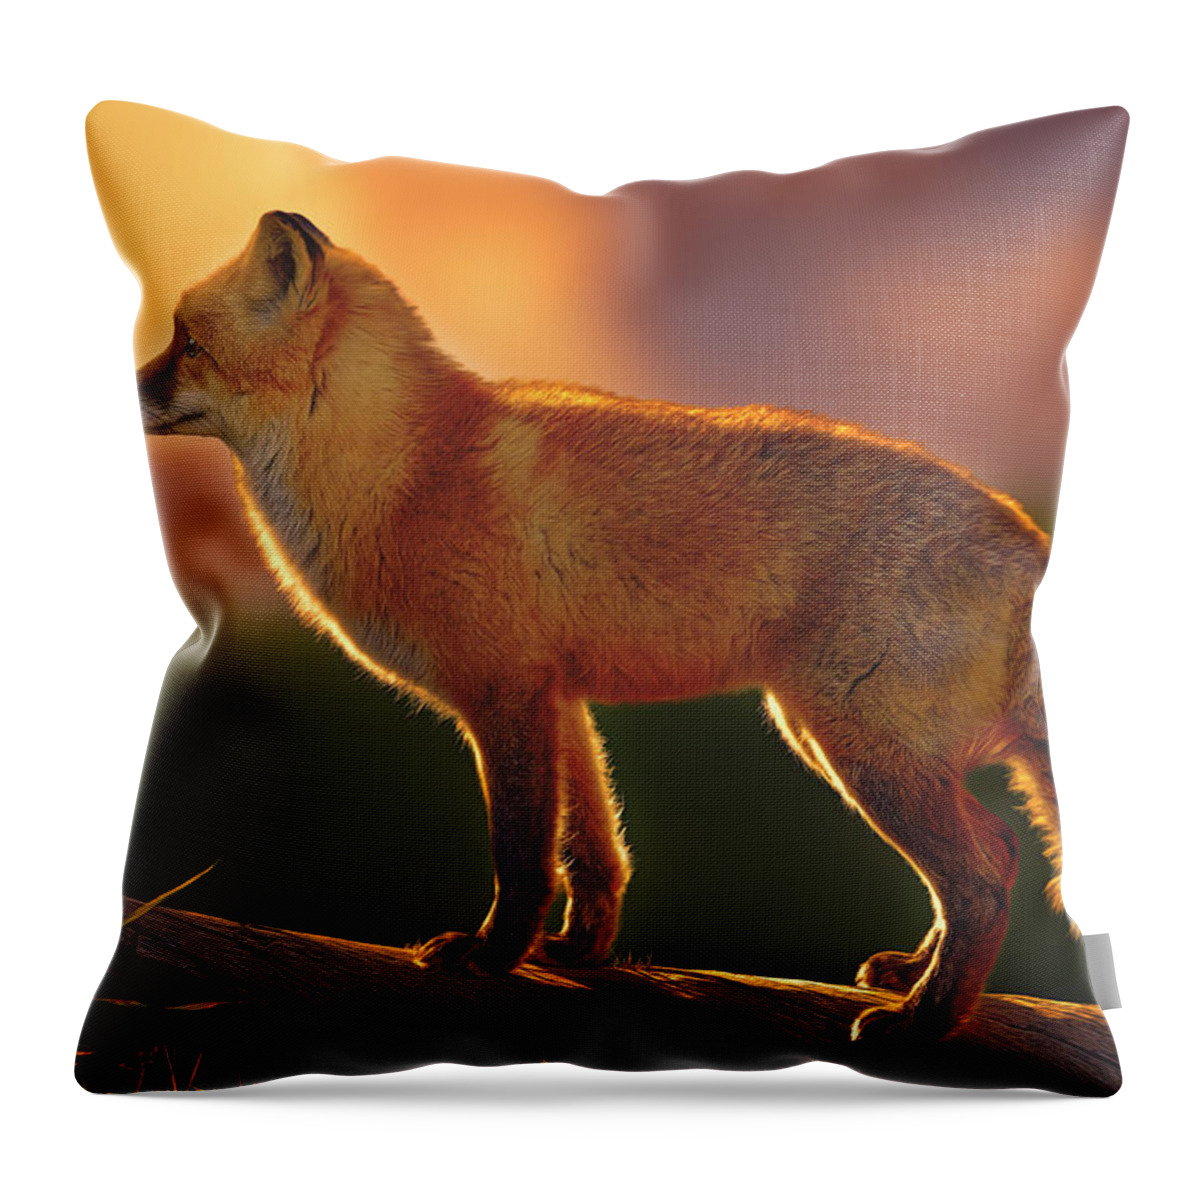 Animal Throw Pillow featuring the photograph A New Day Dawning by Brian Cross